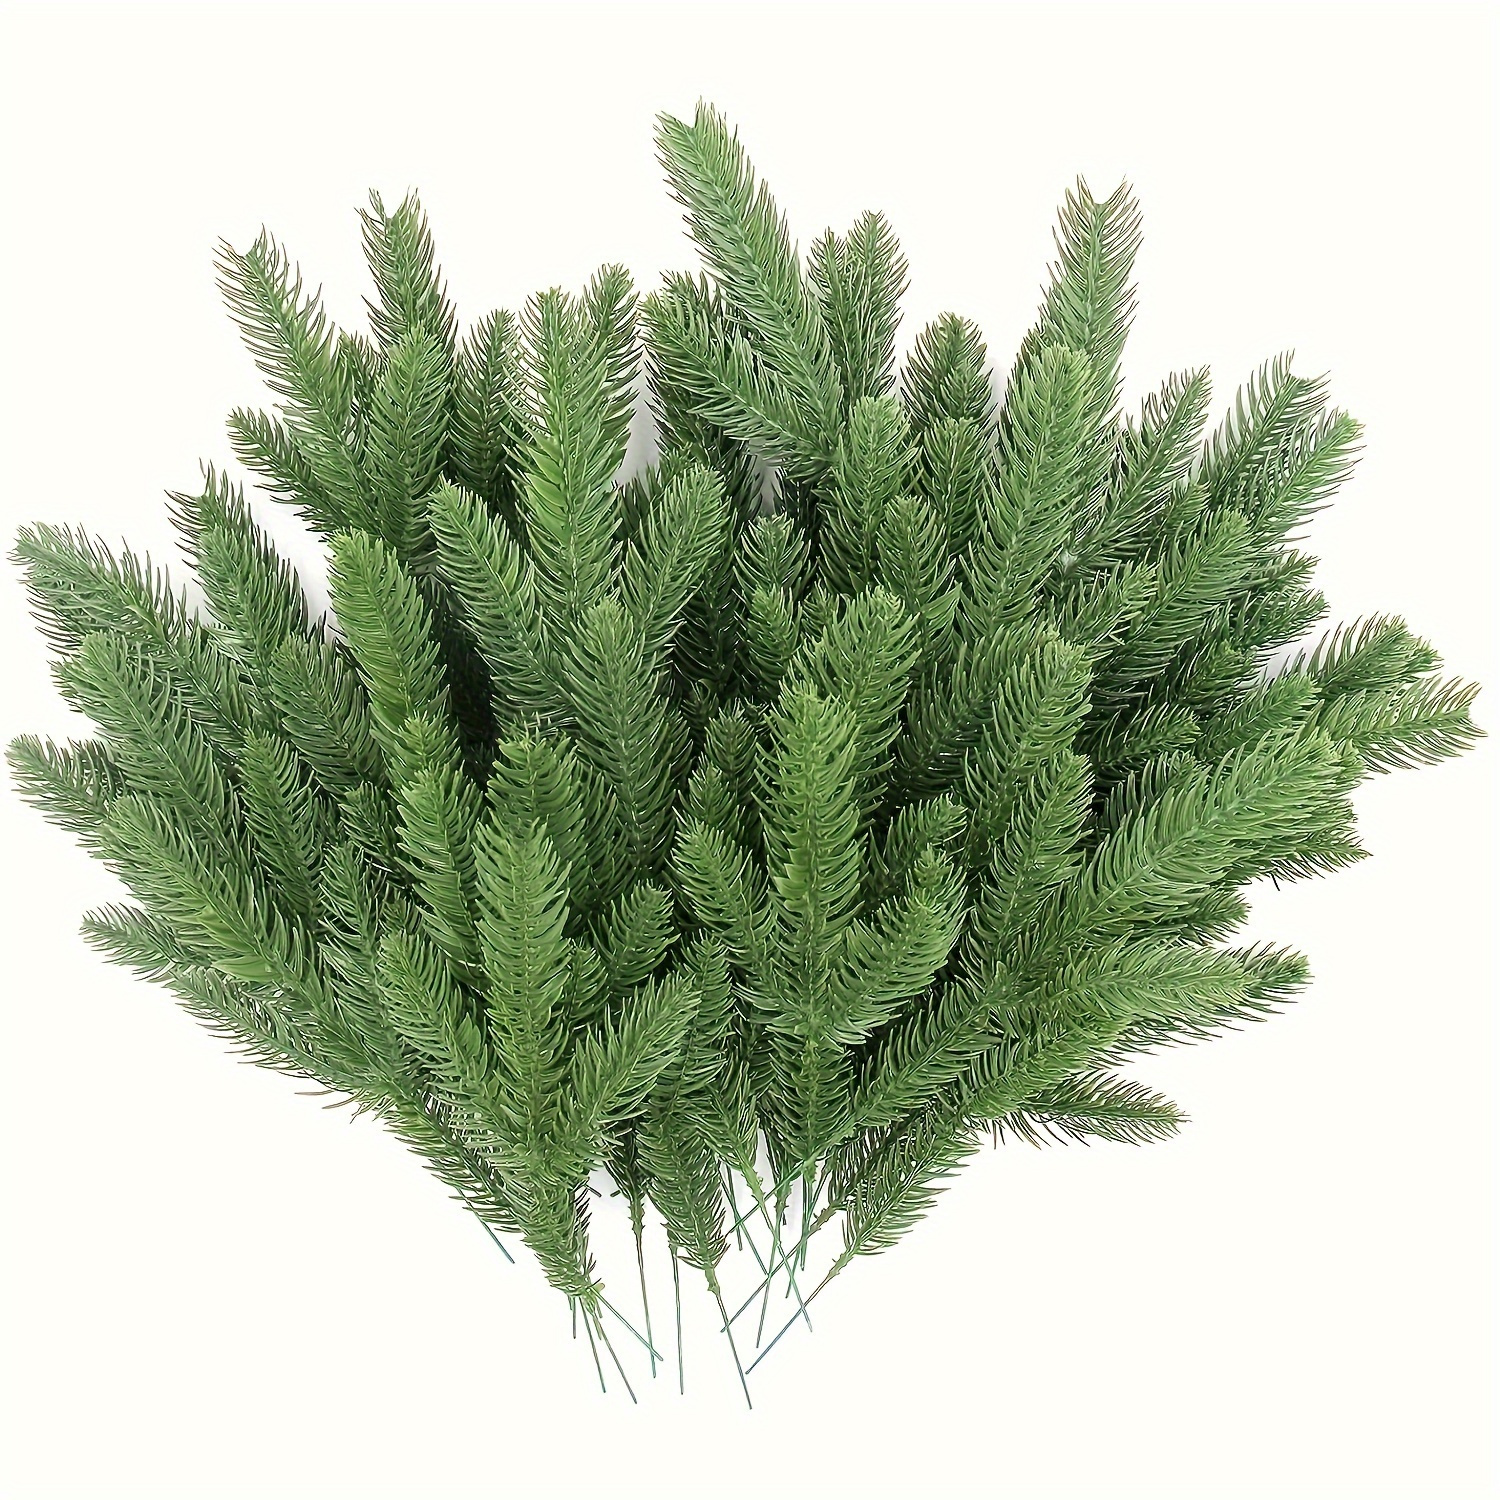 

68pcs Artificial Pine Branches Green Plant Pine Needles Diy Wreath Christmas And Home Garden Decoration Accessories